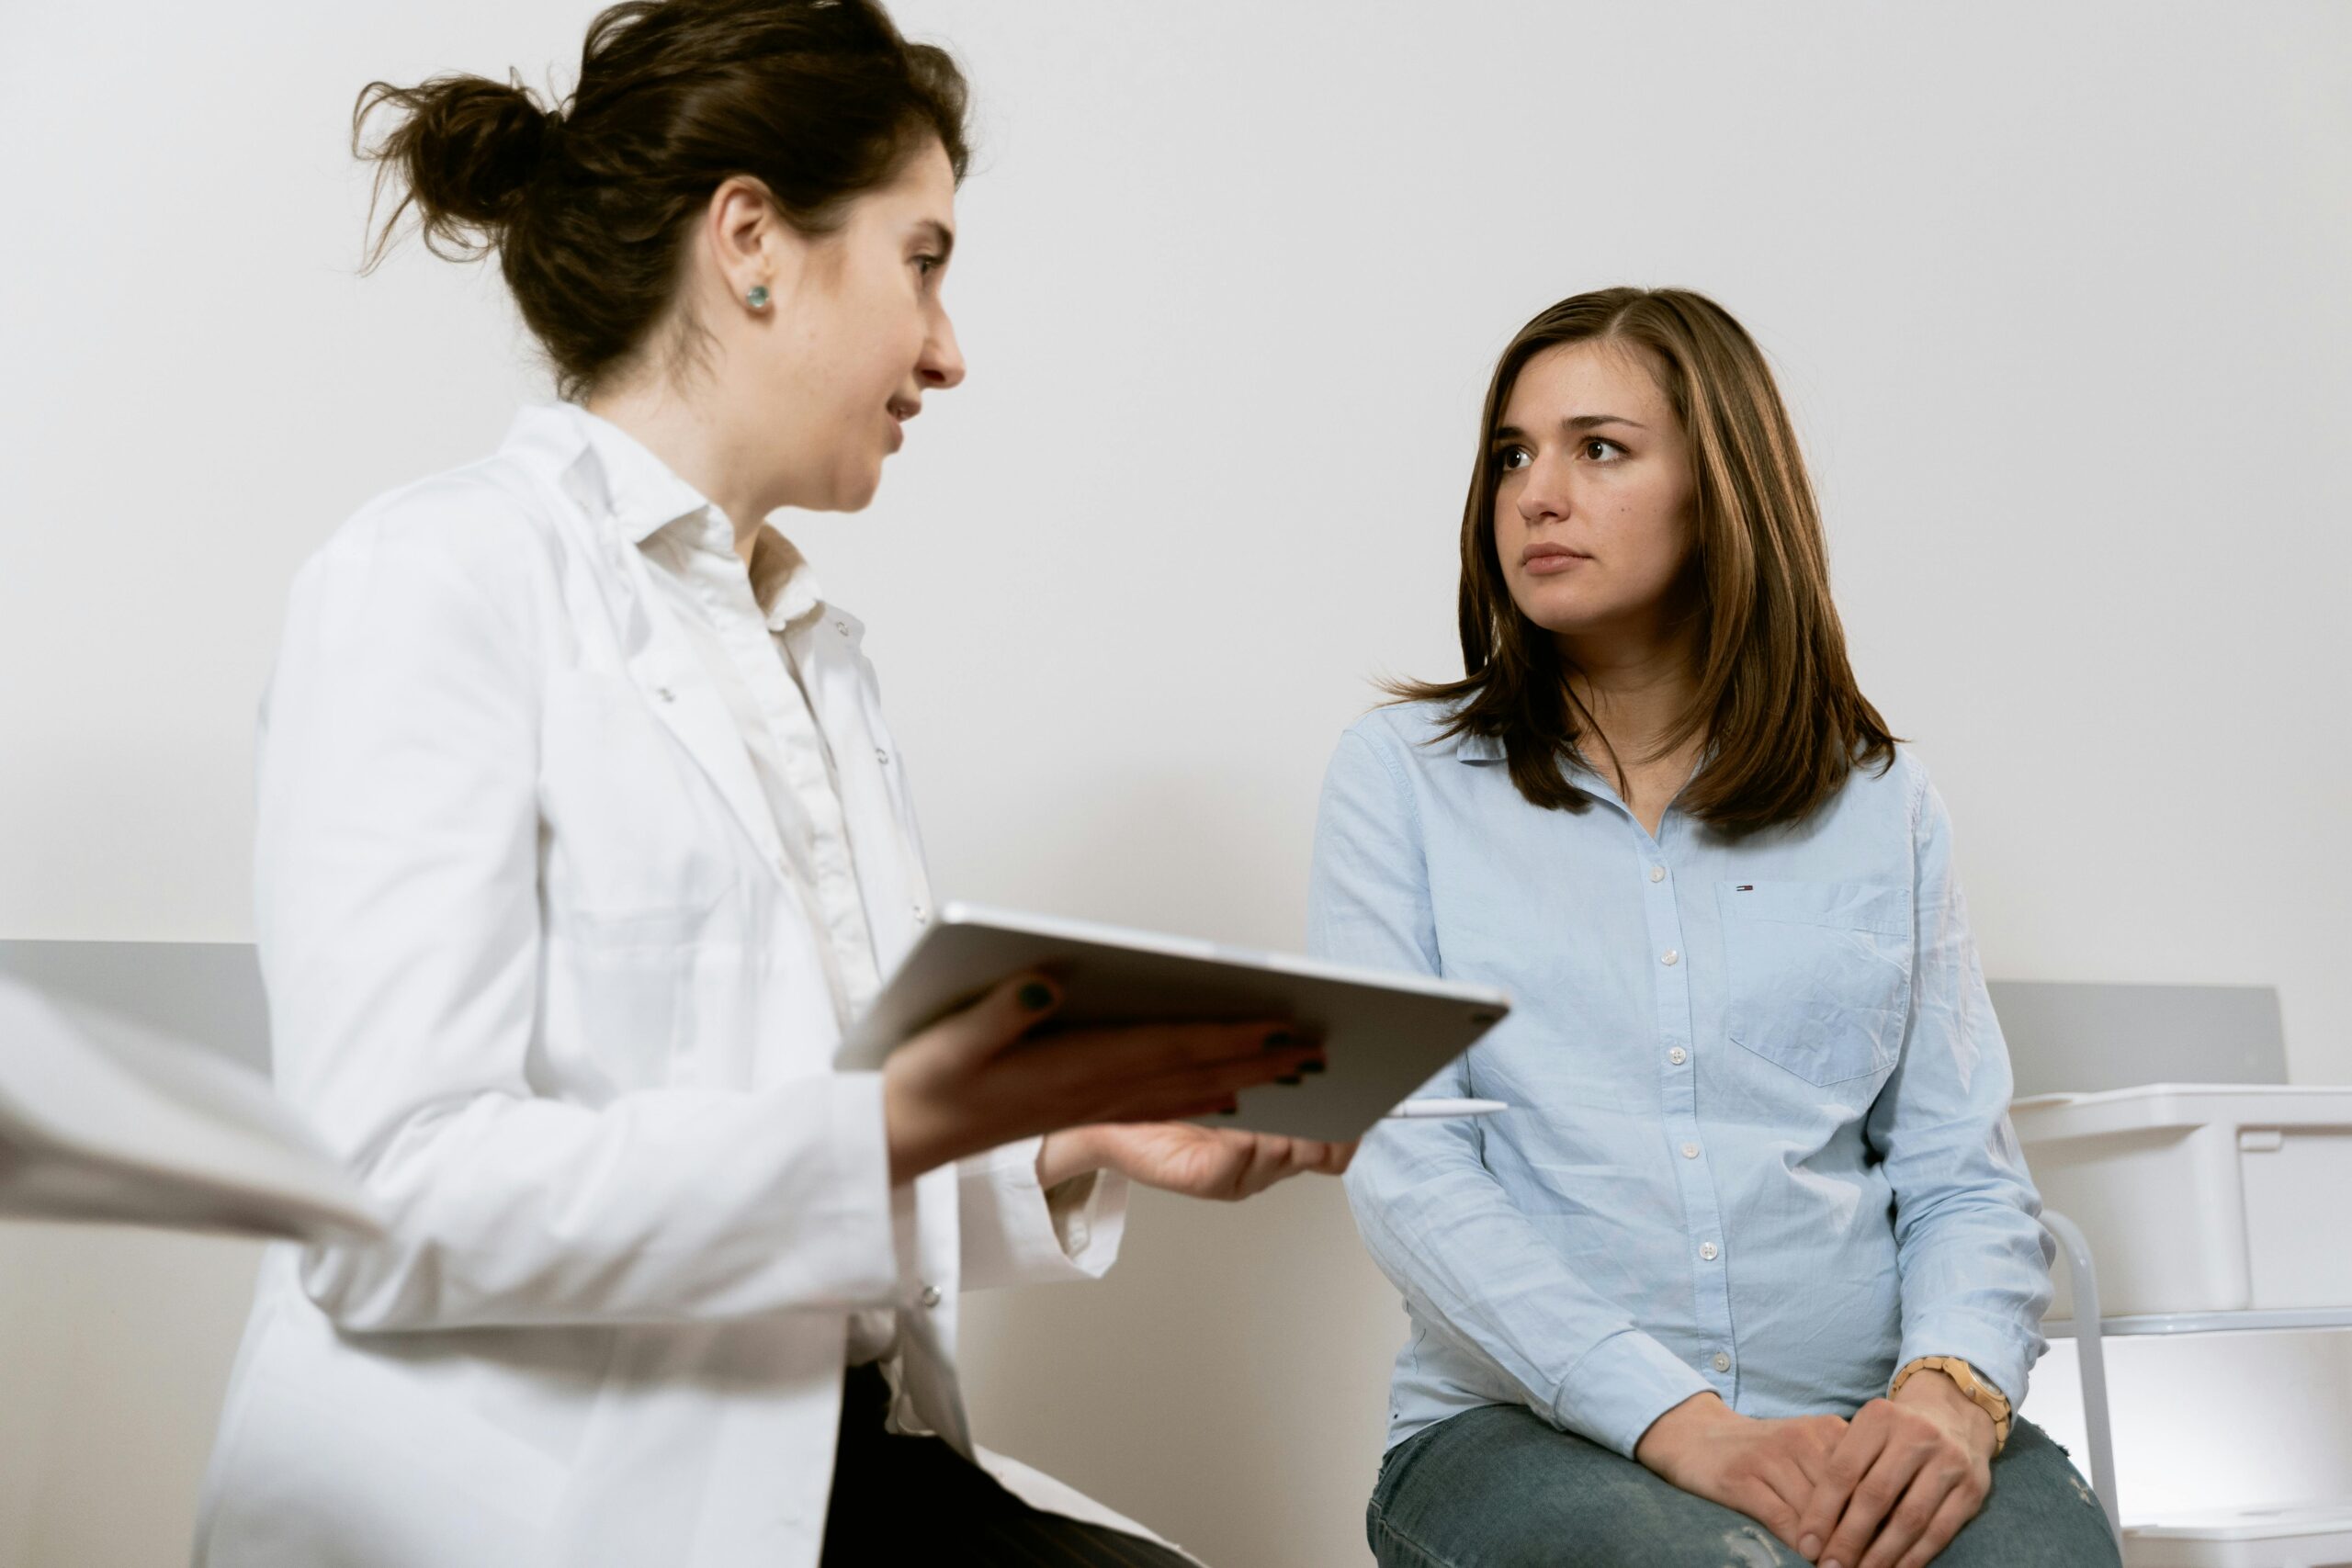 A healthcare professional holding a tablet converses with a seated woman in casual clothing, partnering with health care providers to ensure comprehensive care in a clinical setting.